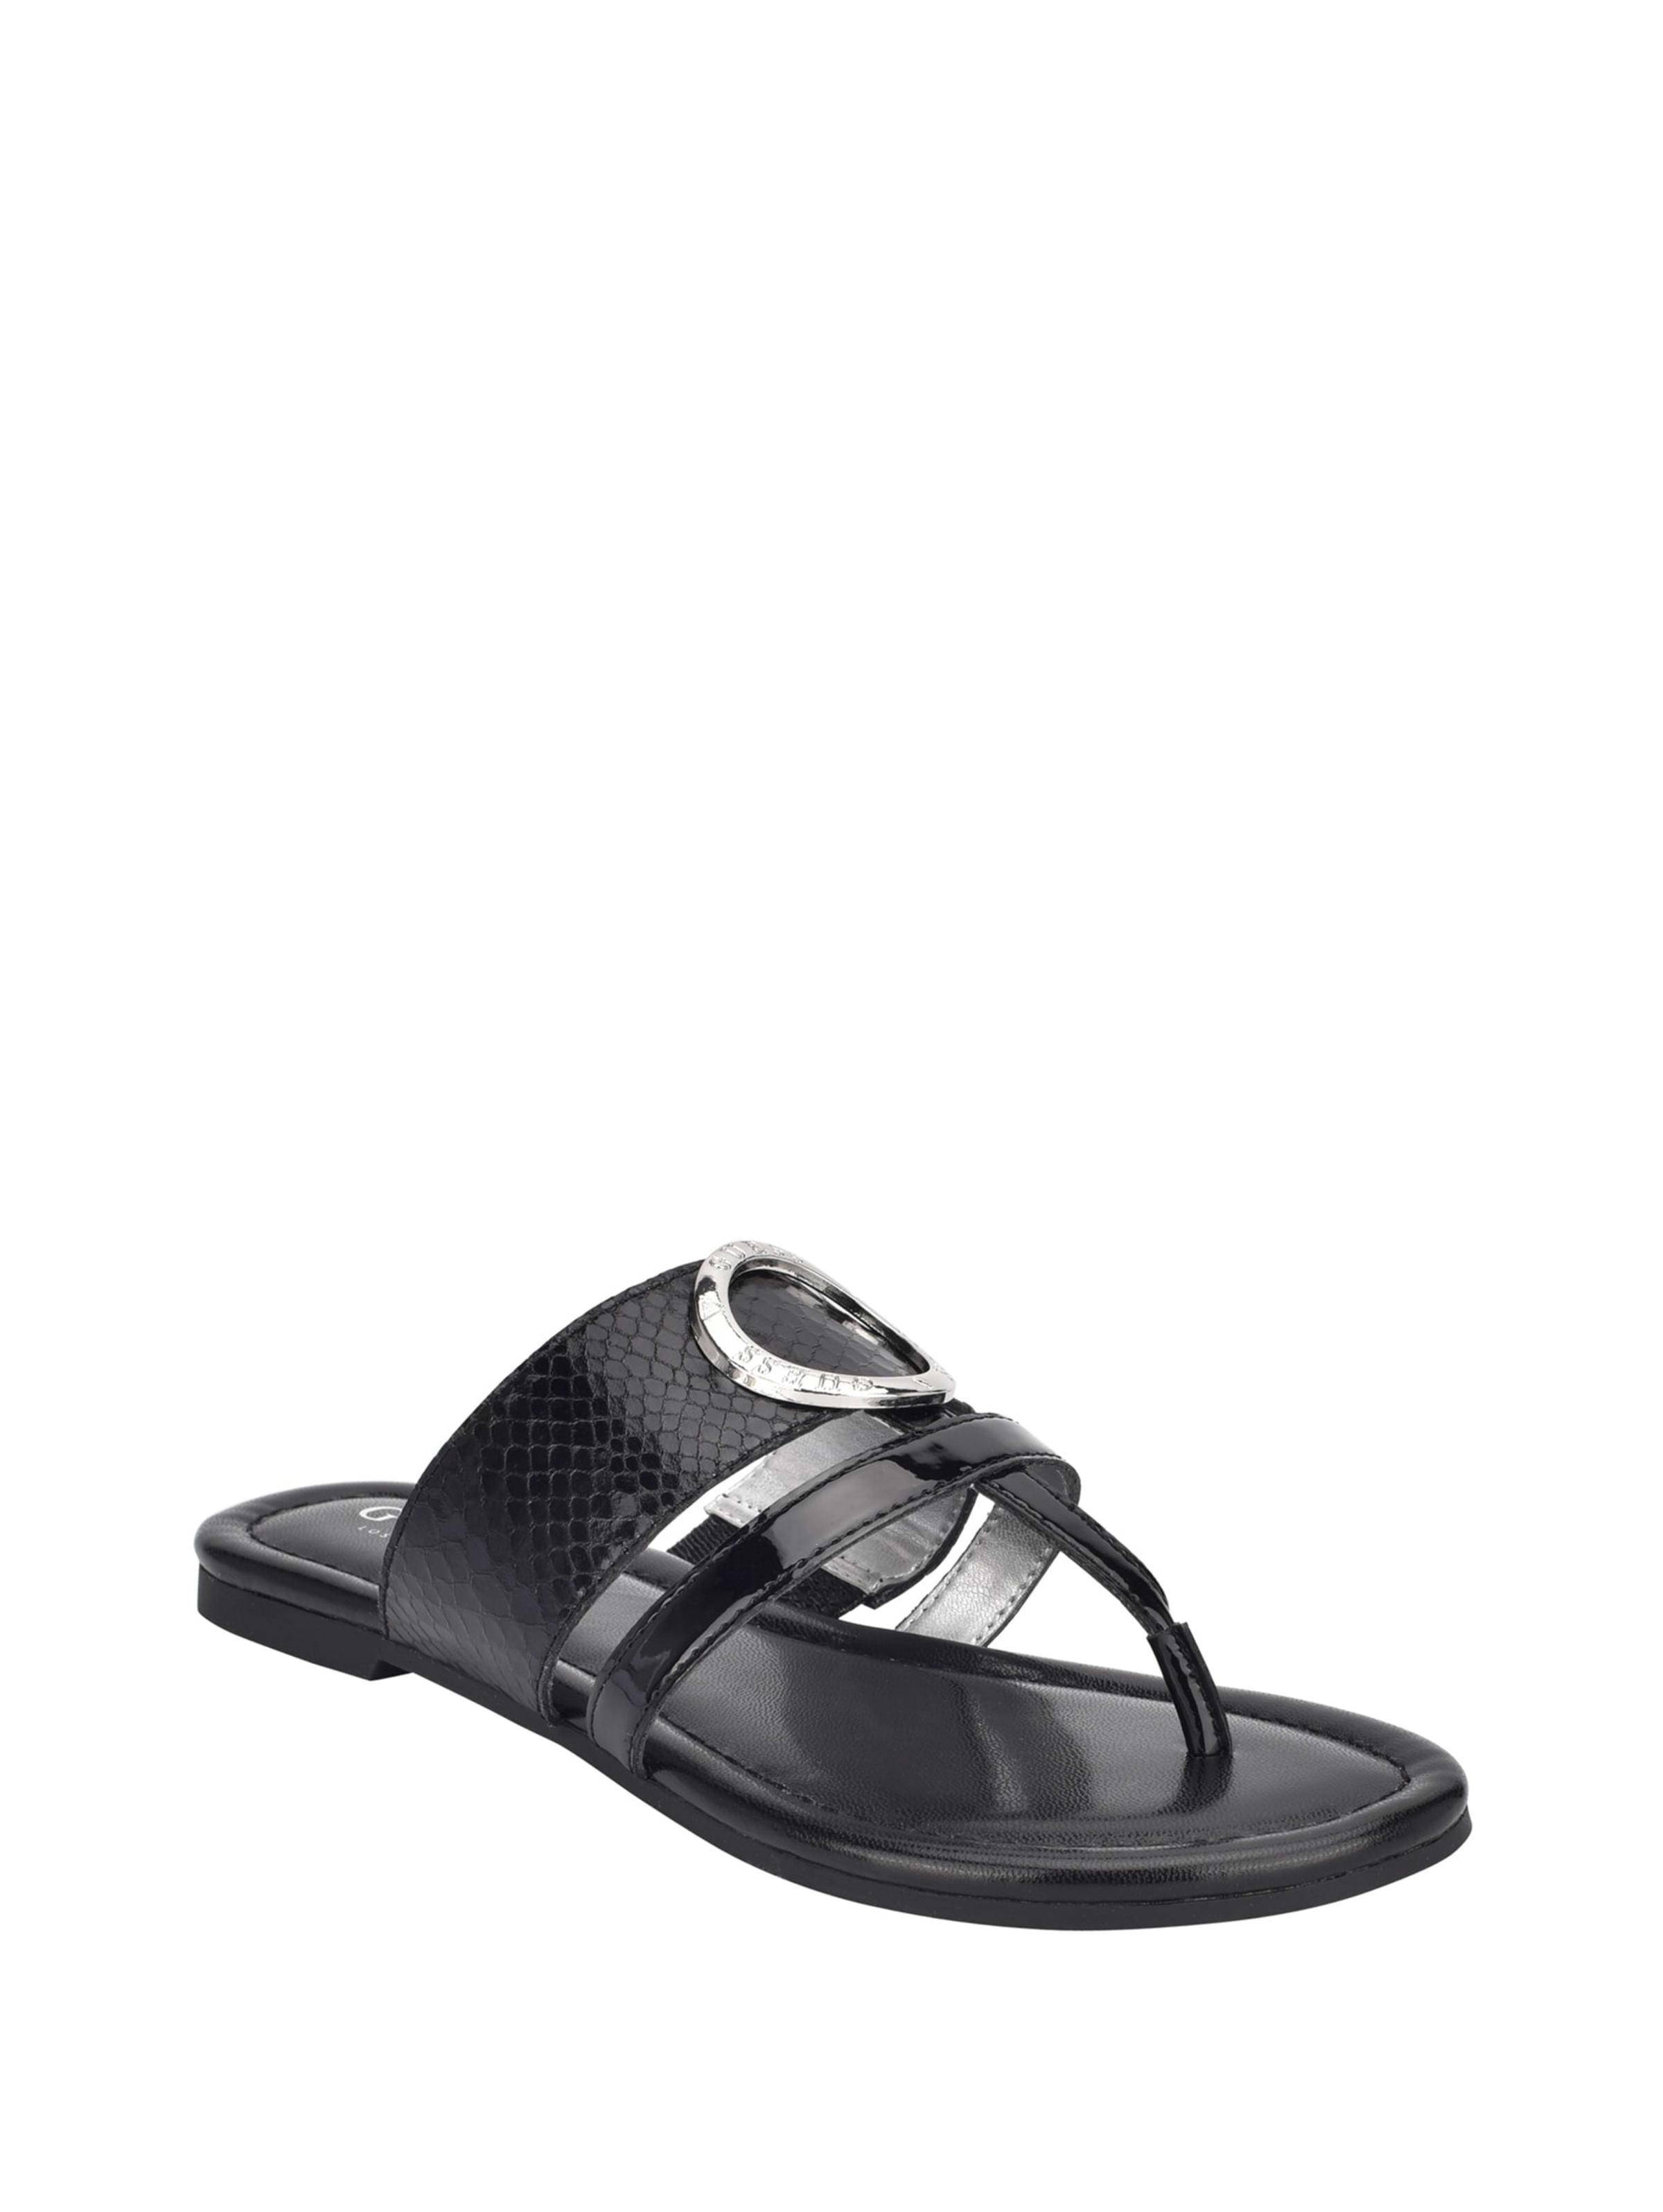 guess outlet sandals